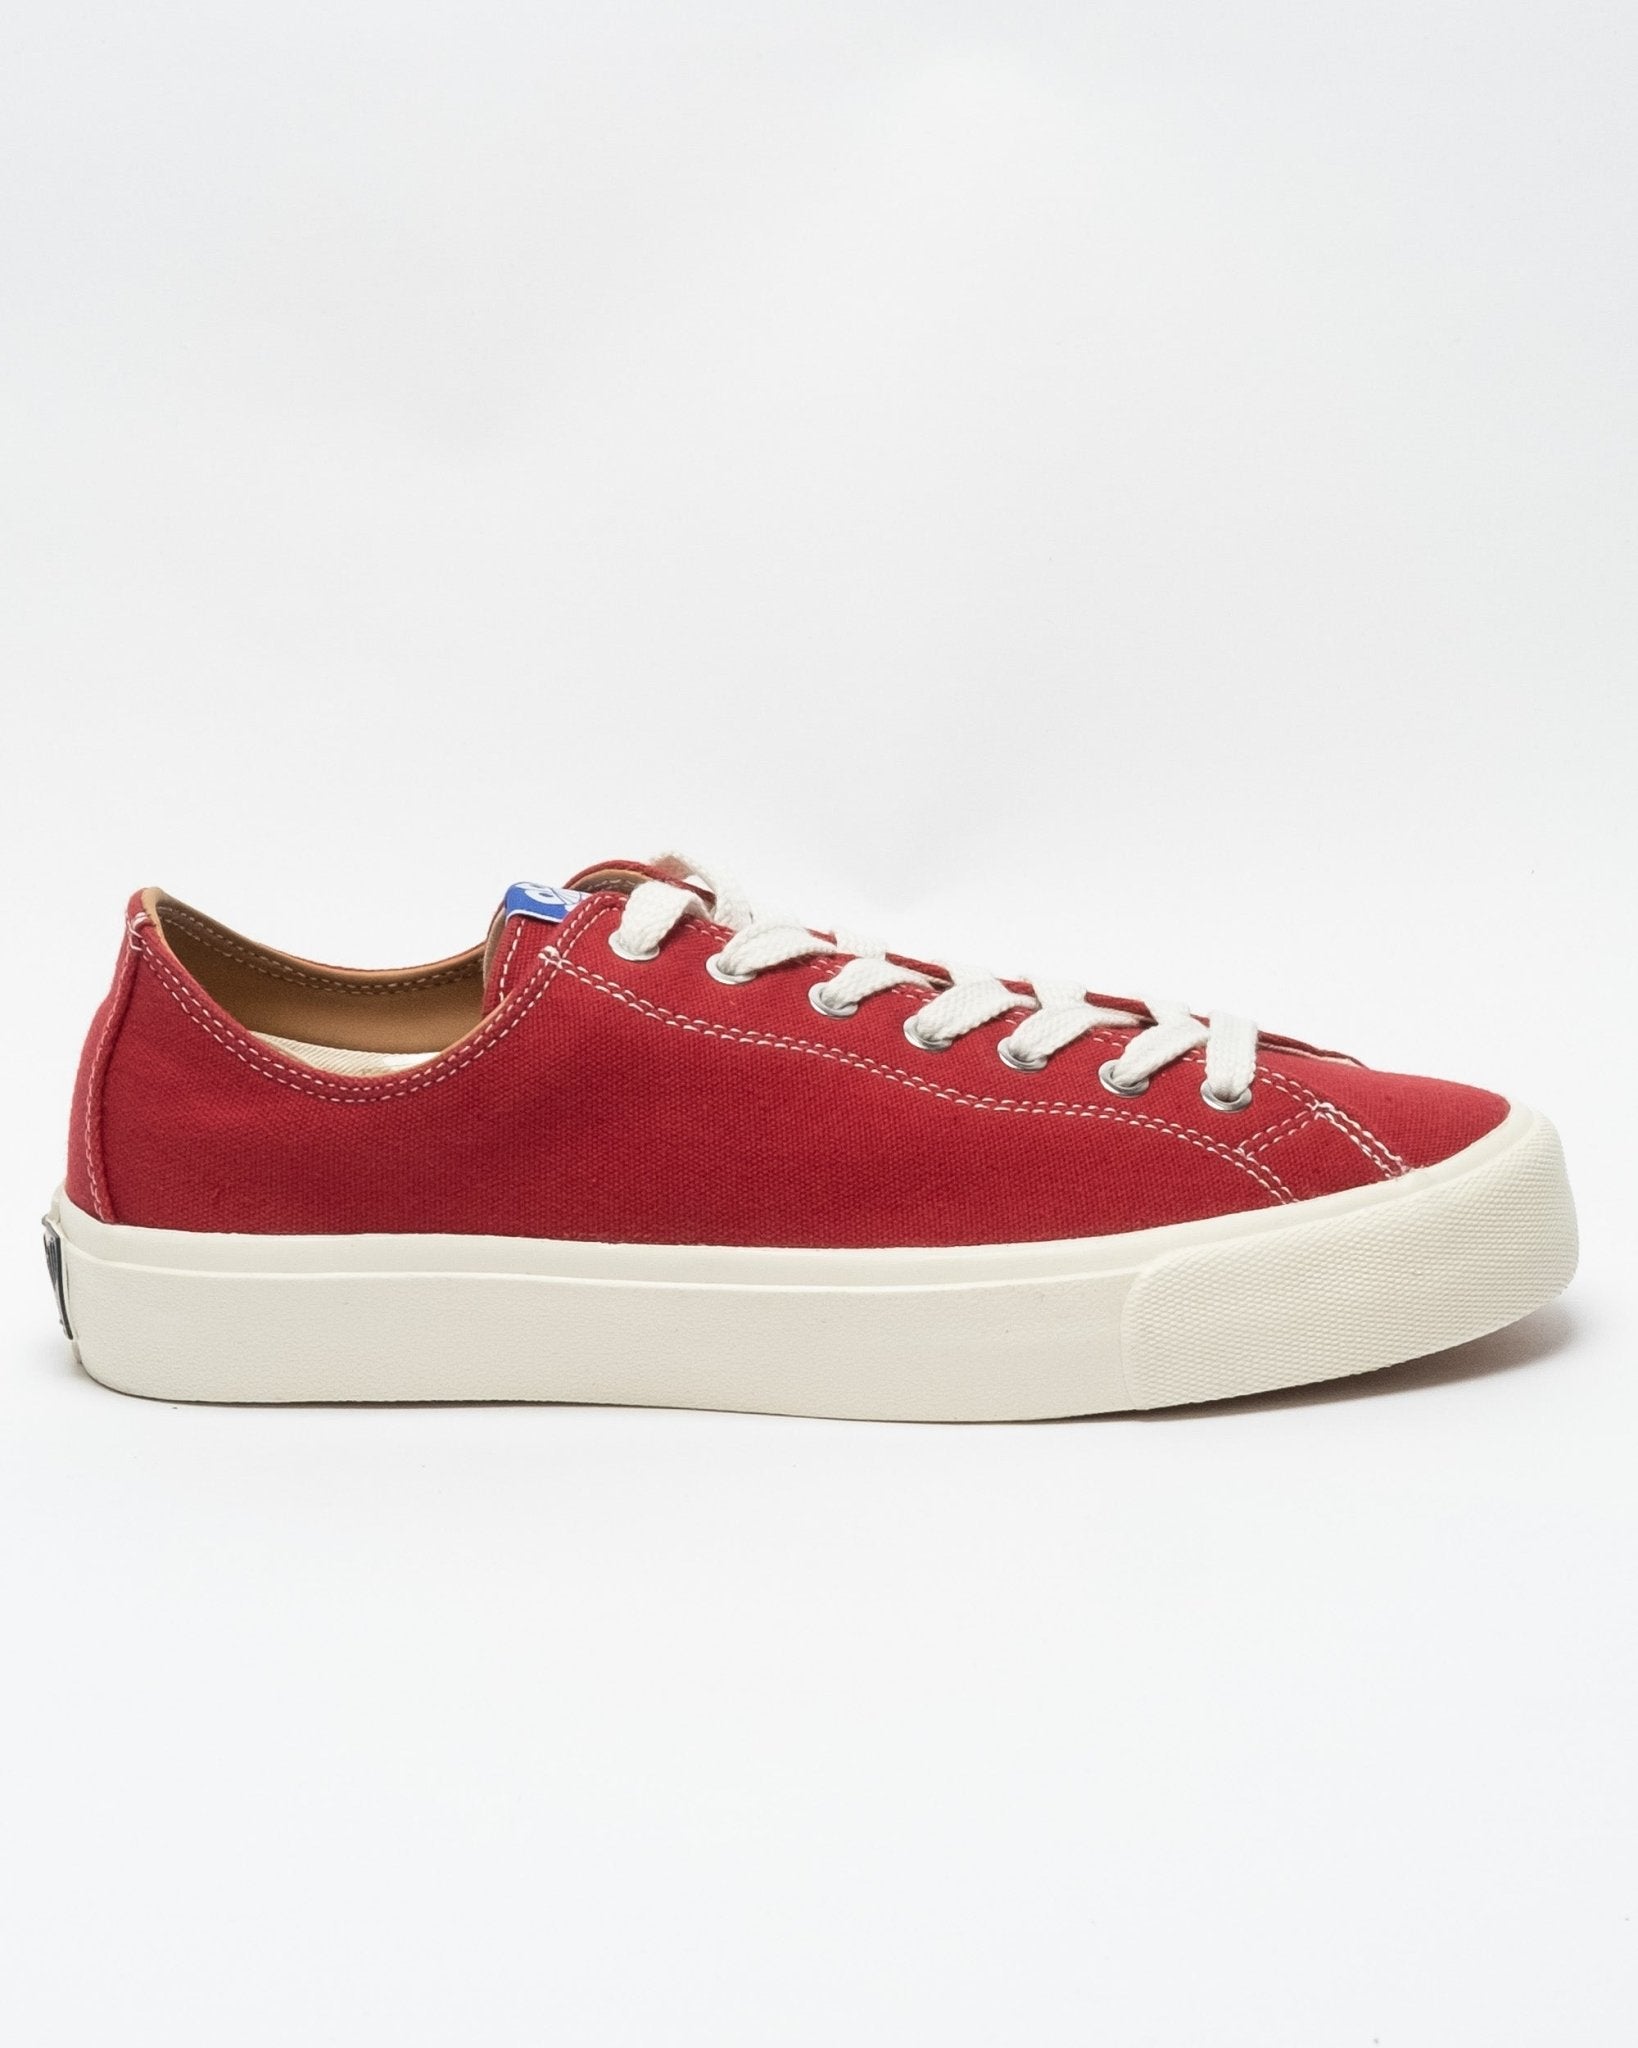 Last Resort AB VM003-Canvas LO Classic Red/White, Meadow Online Store